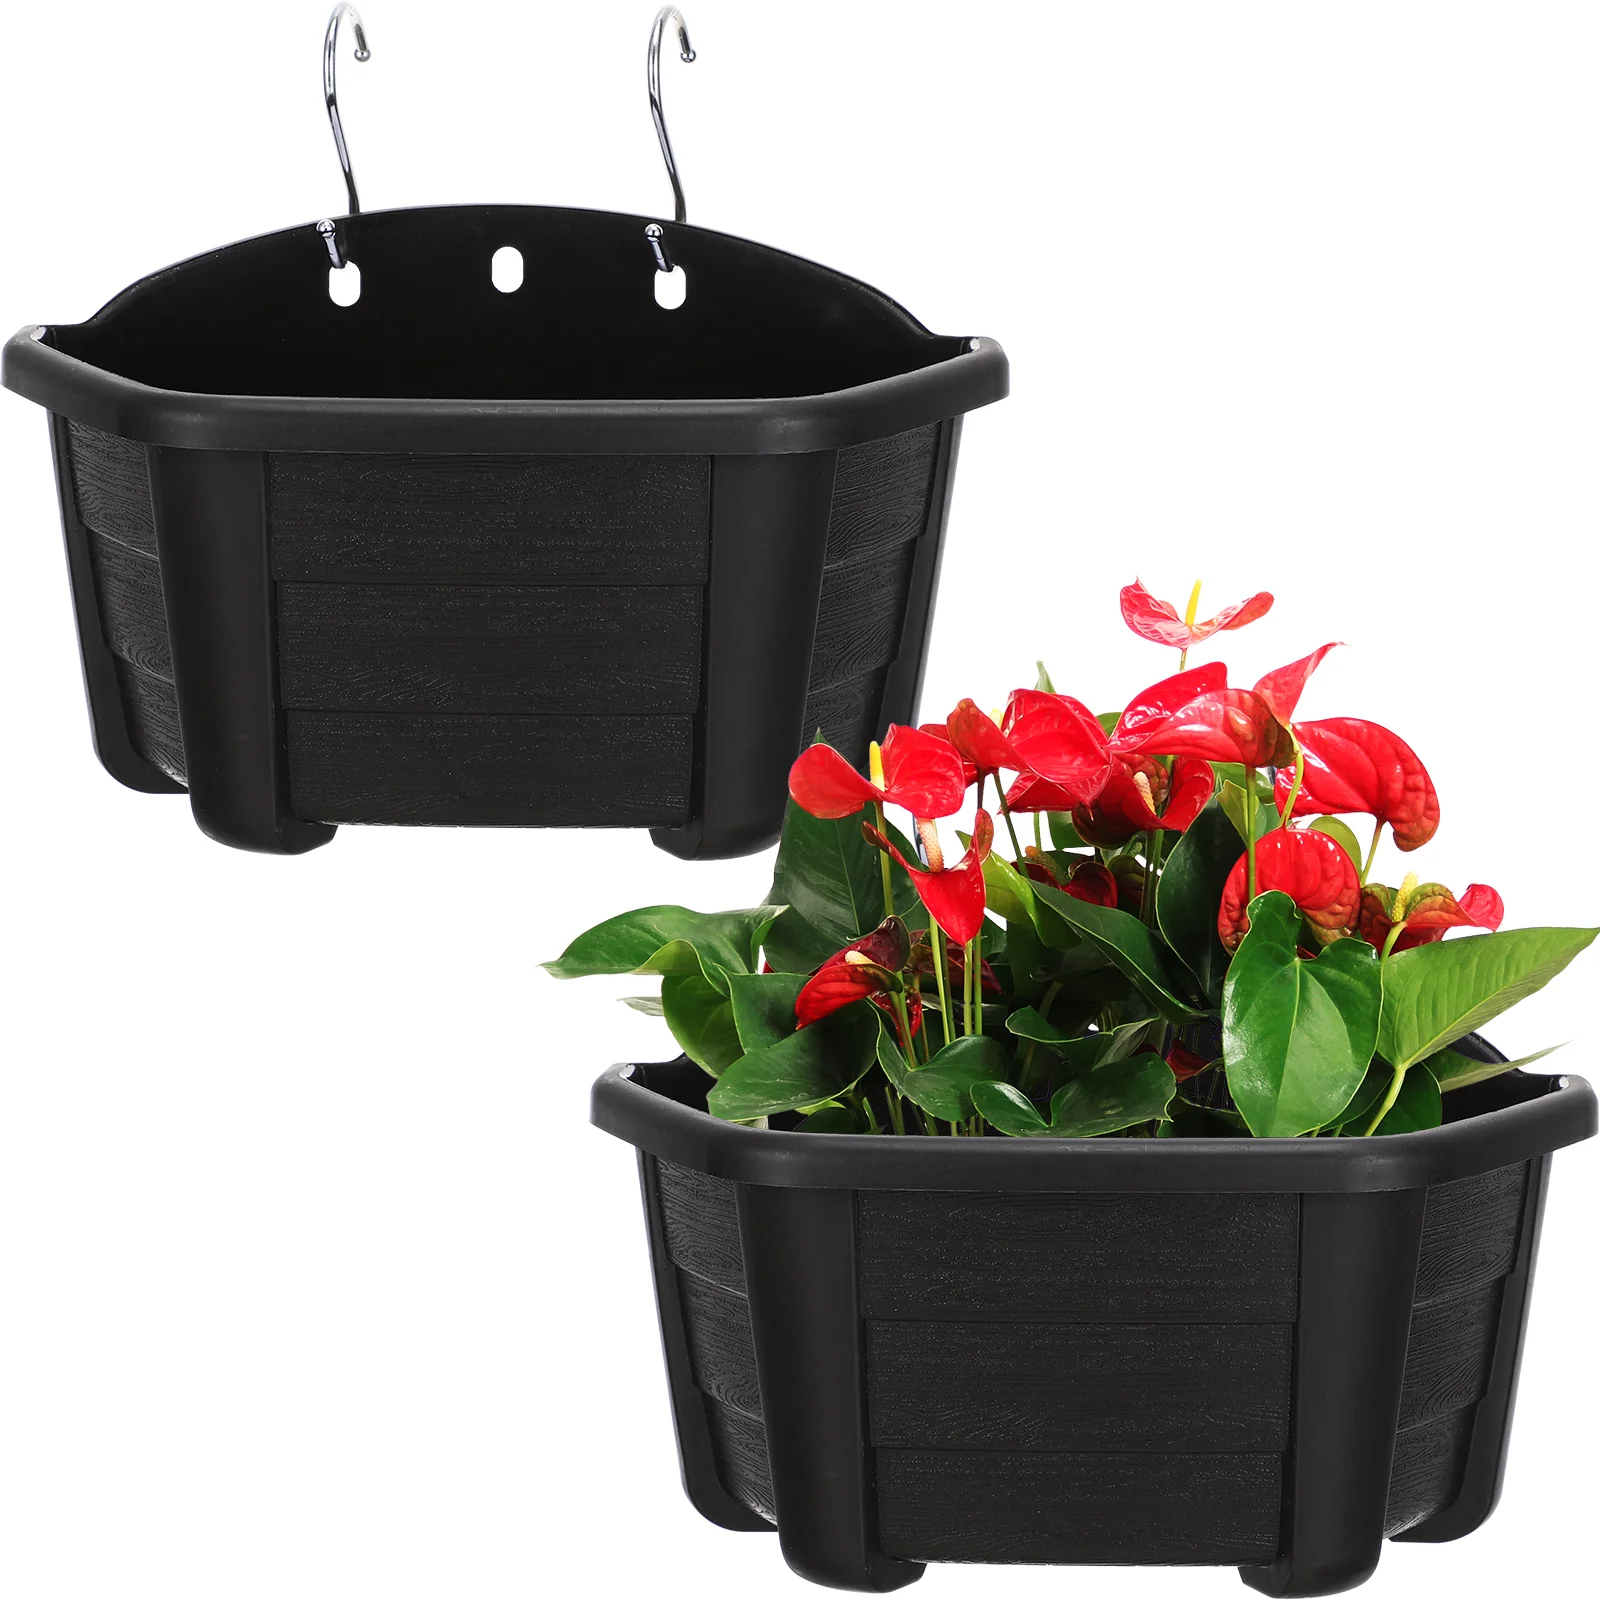 

Wall Mounted Semicircle Flower Pot Hanging Planter Outdoor Fence Planters Plants Indoor Buckets